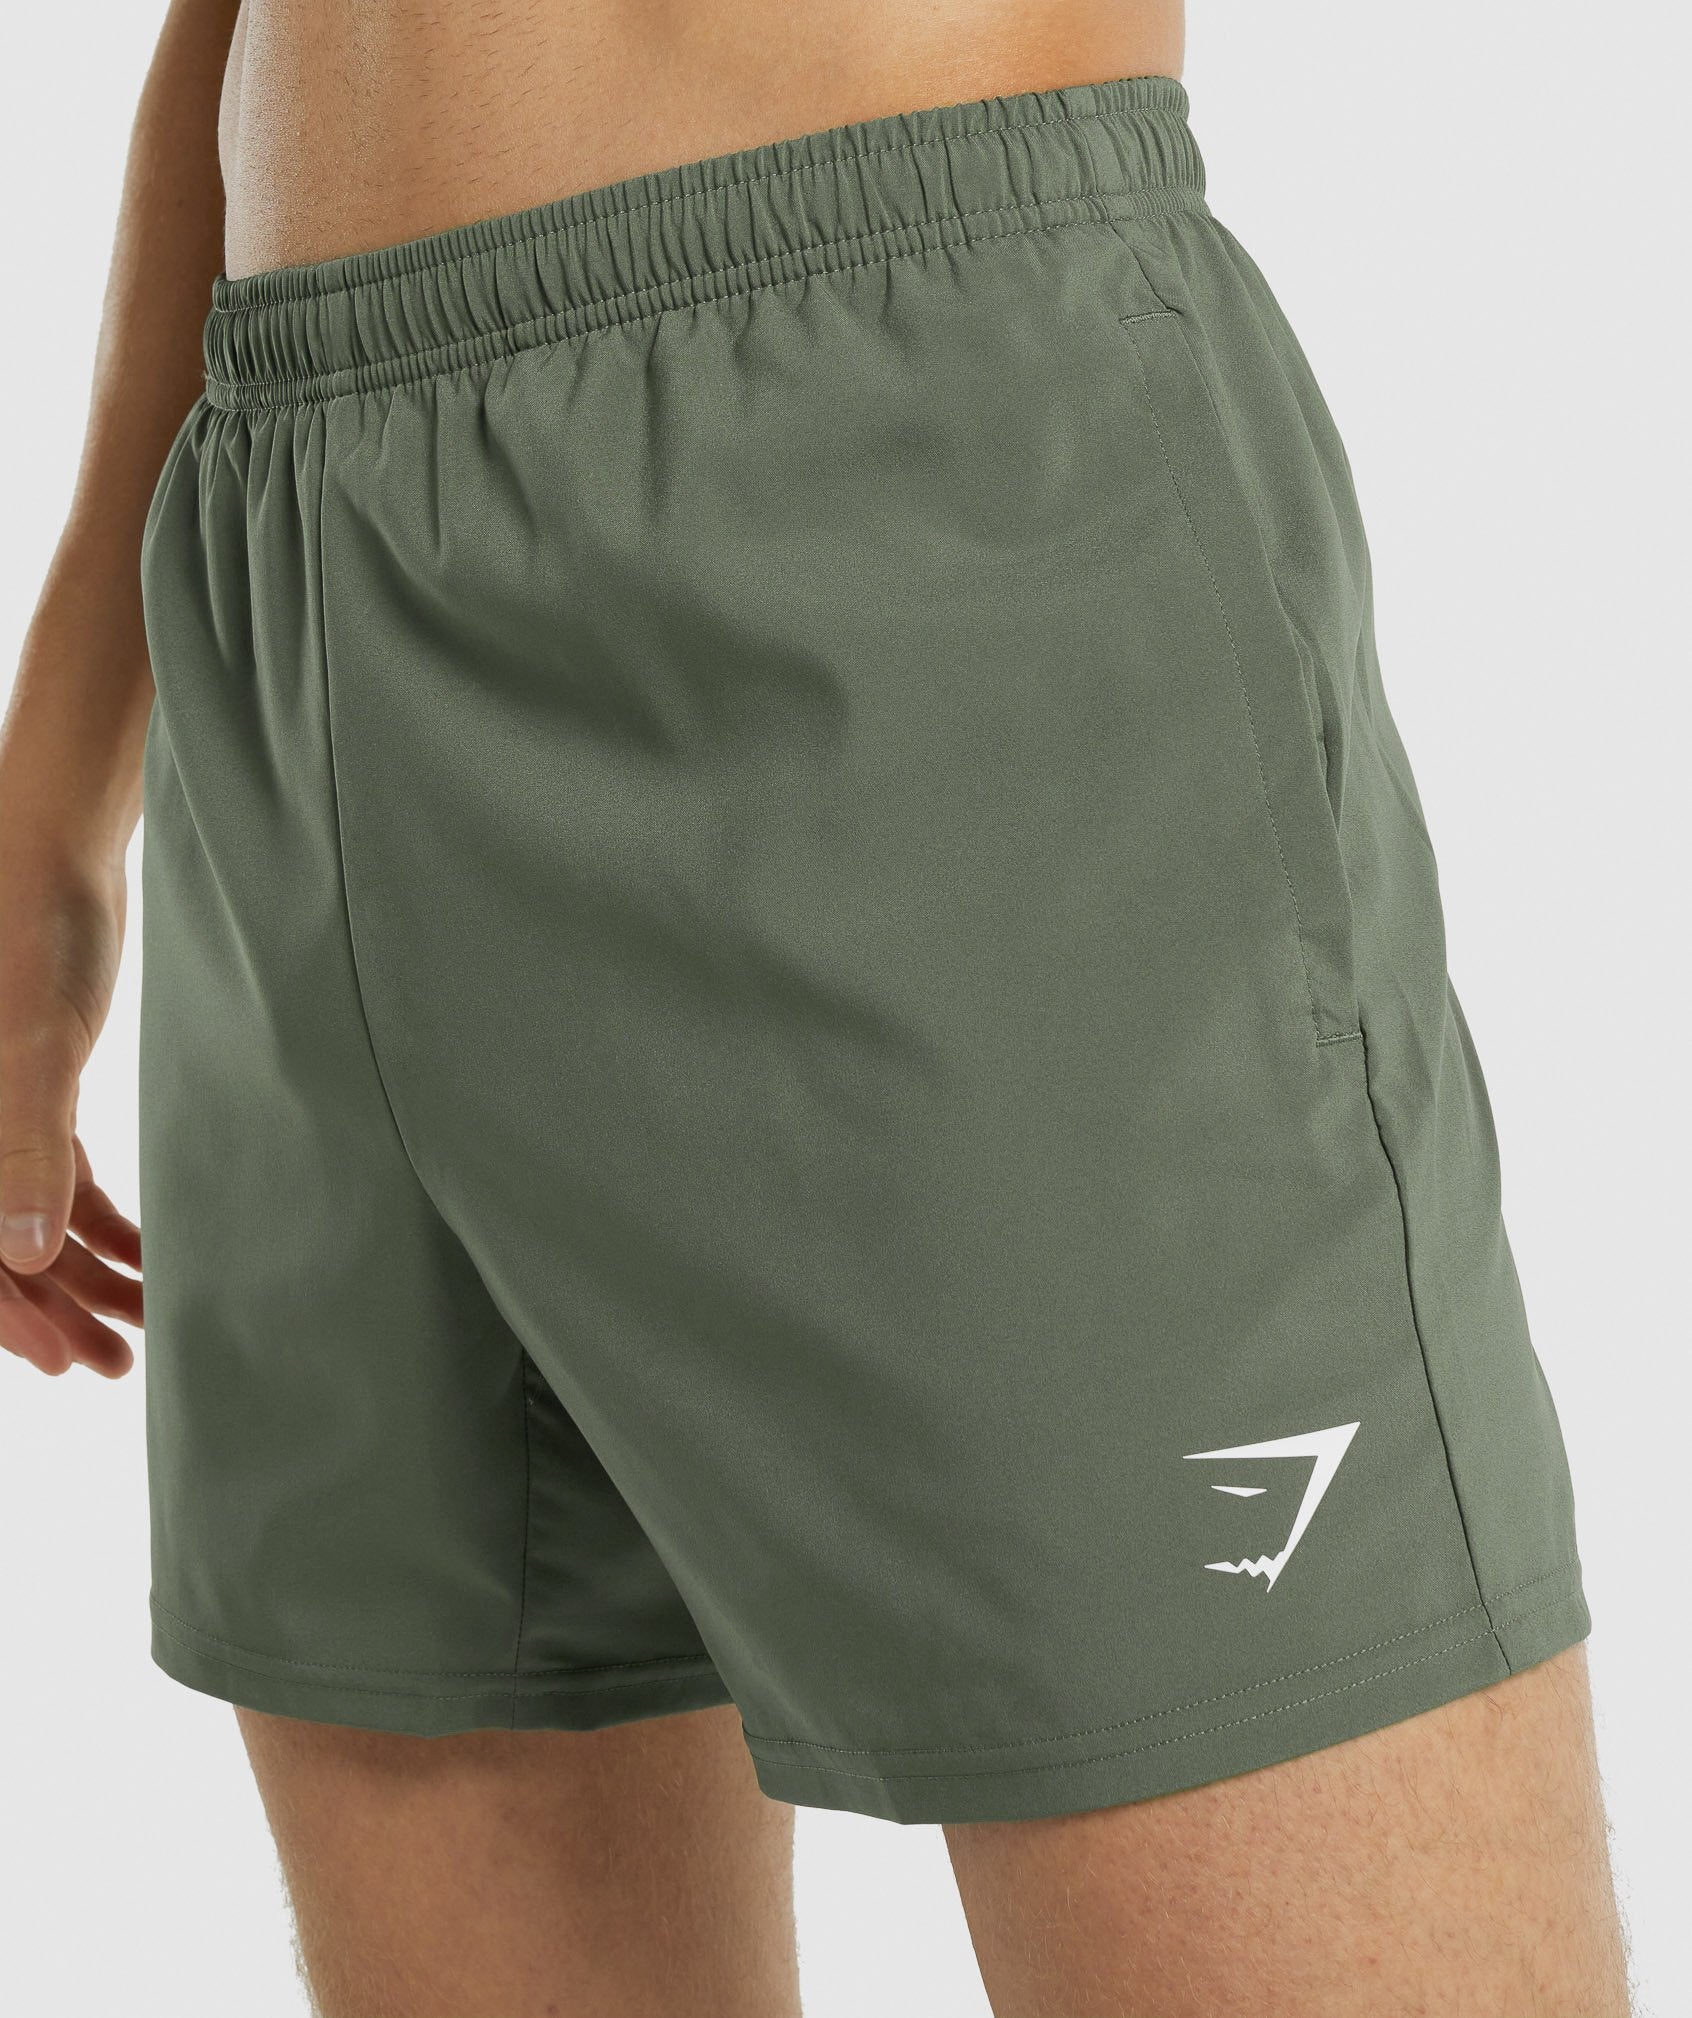 Arrival 5" Shorts in Green - view 5